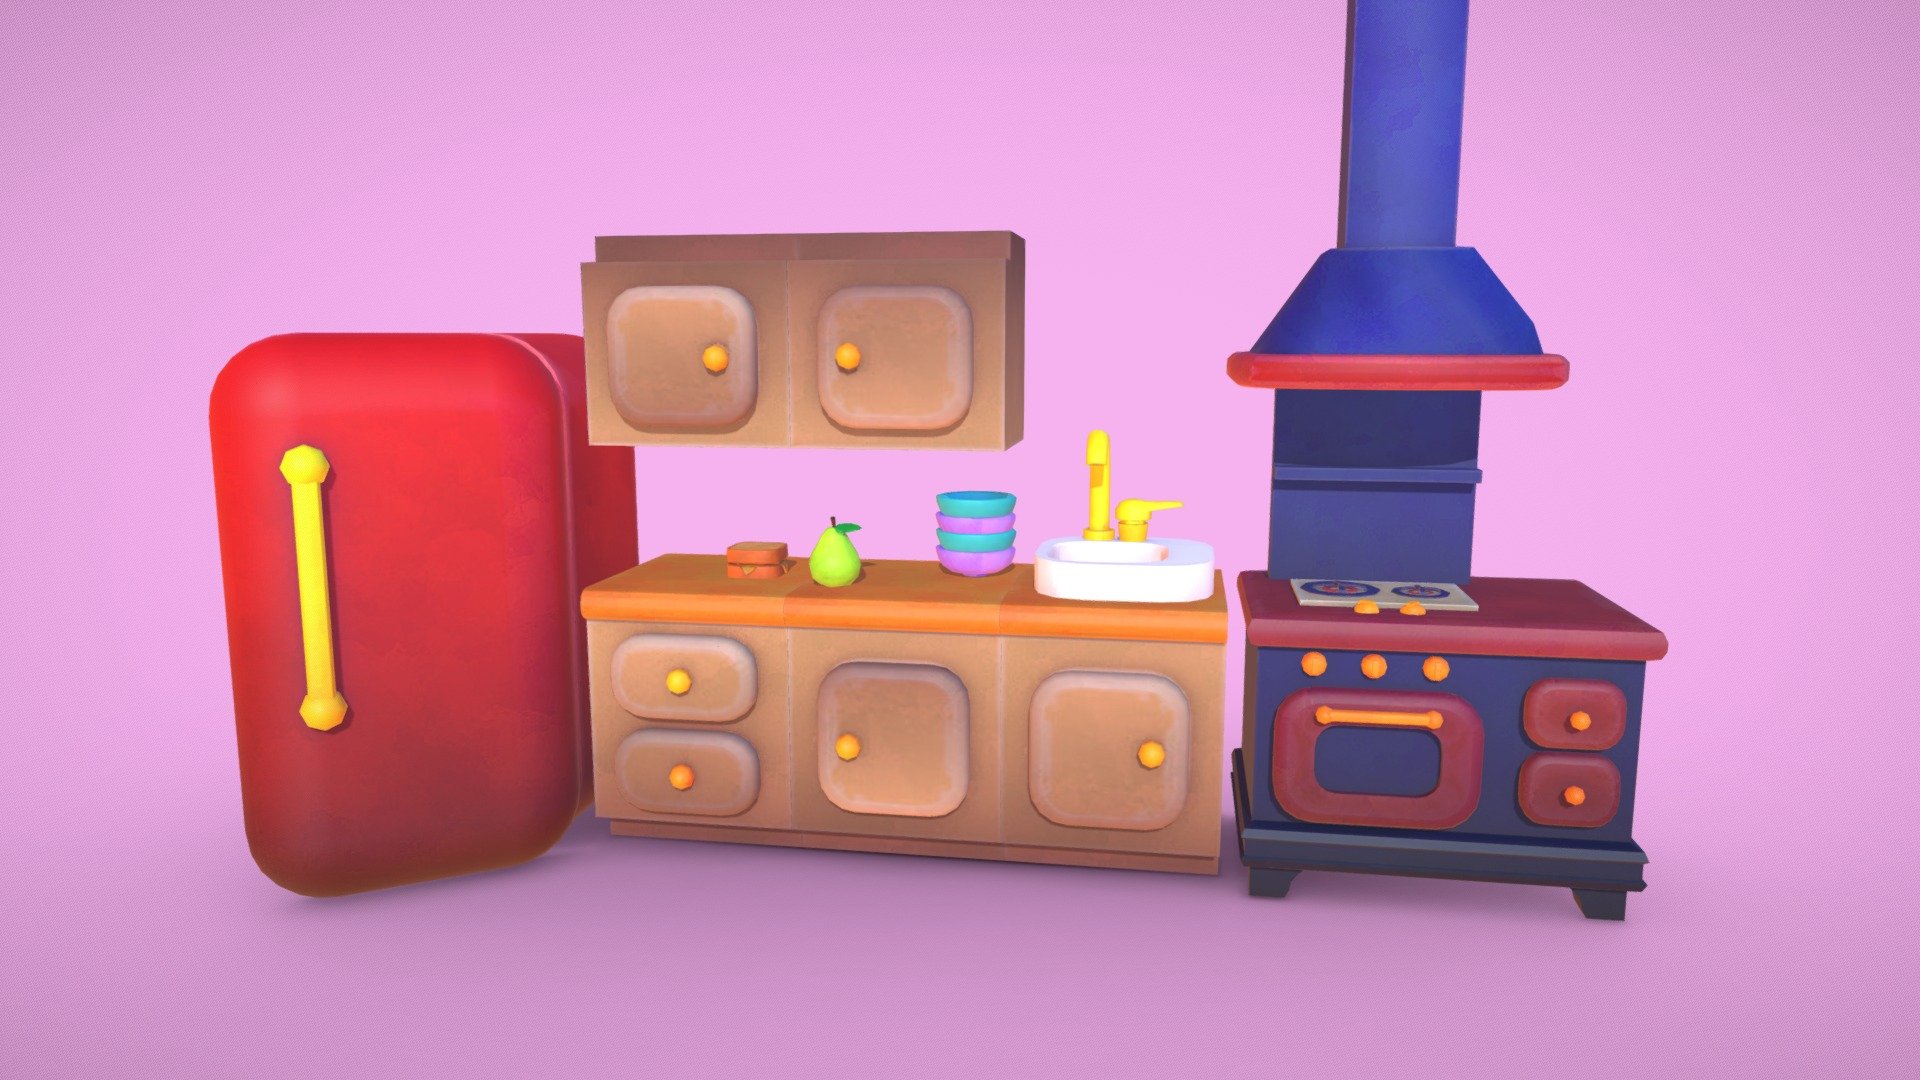 Cute watercolor stylized kitchen asset made for any game you'd create !

Check out my profile for the release of some food pack with the same style very soon !

Please, feel free to contact me if you have any problem with the assets 3d model